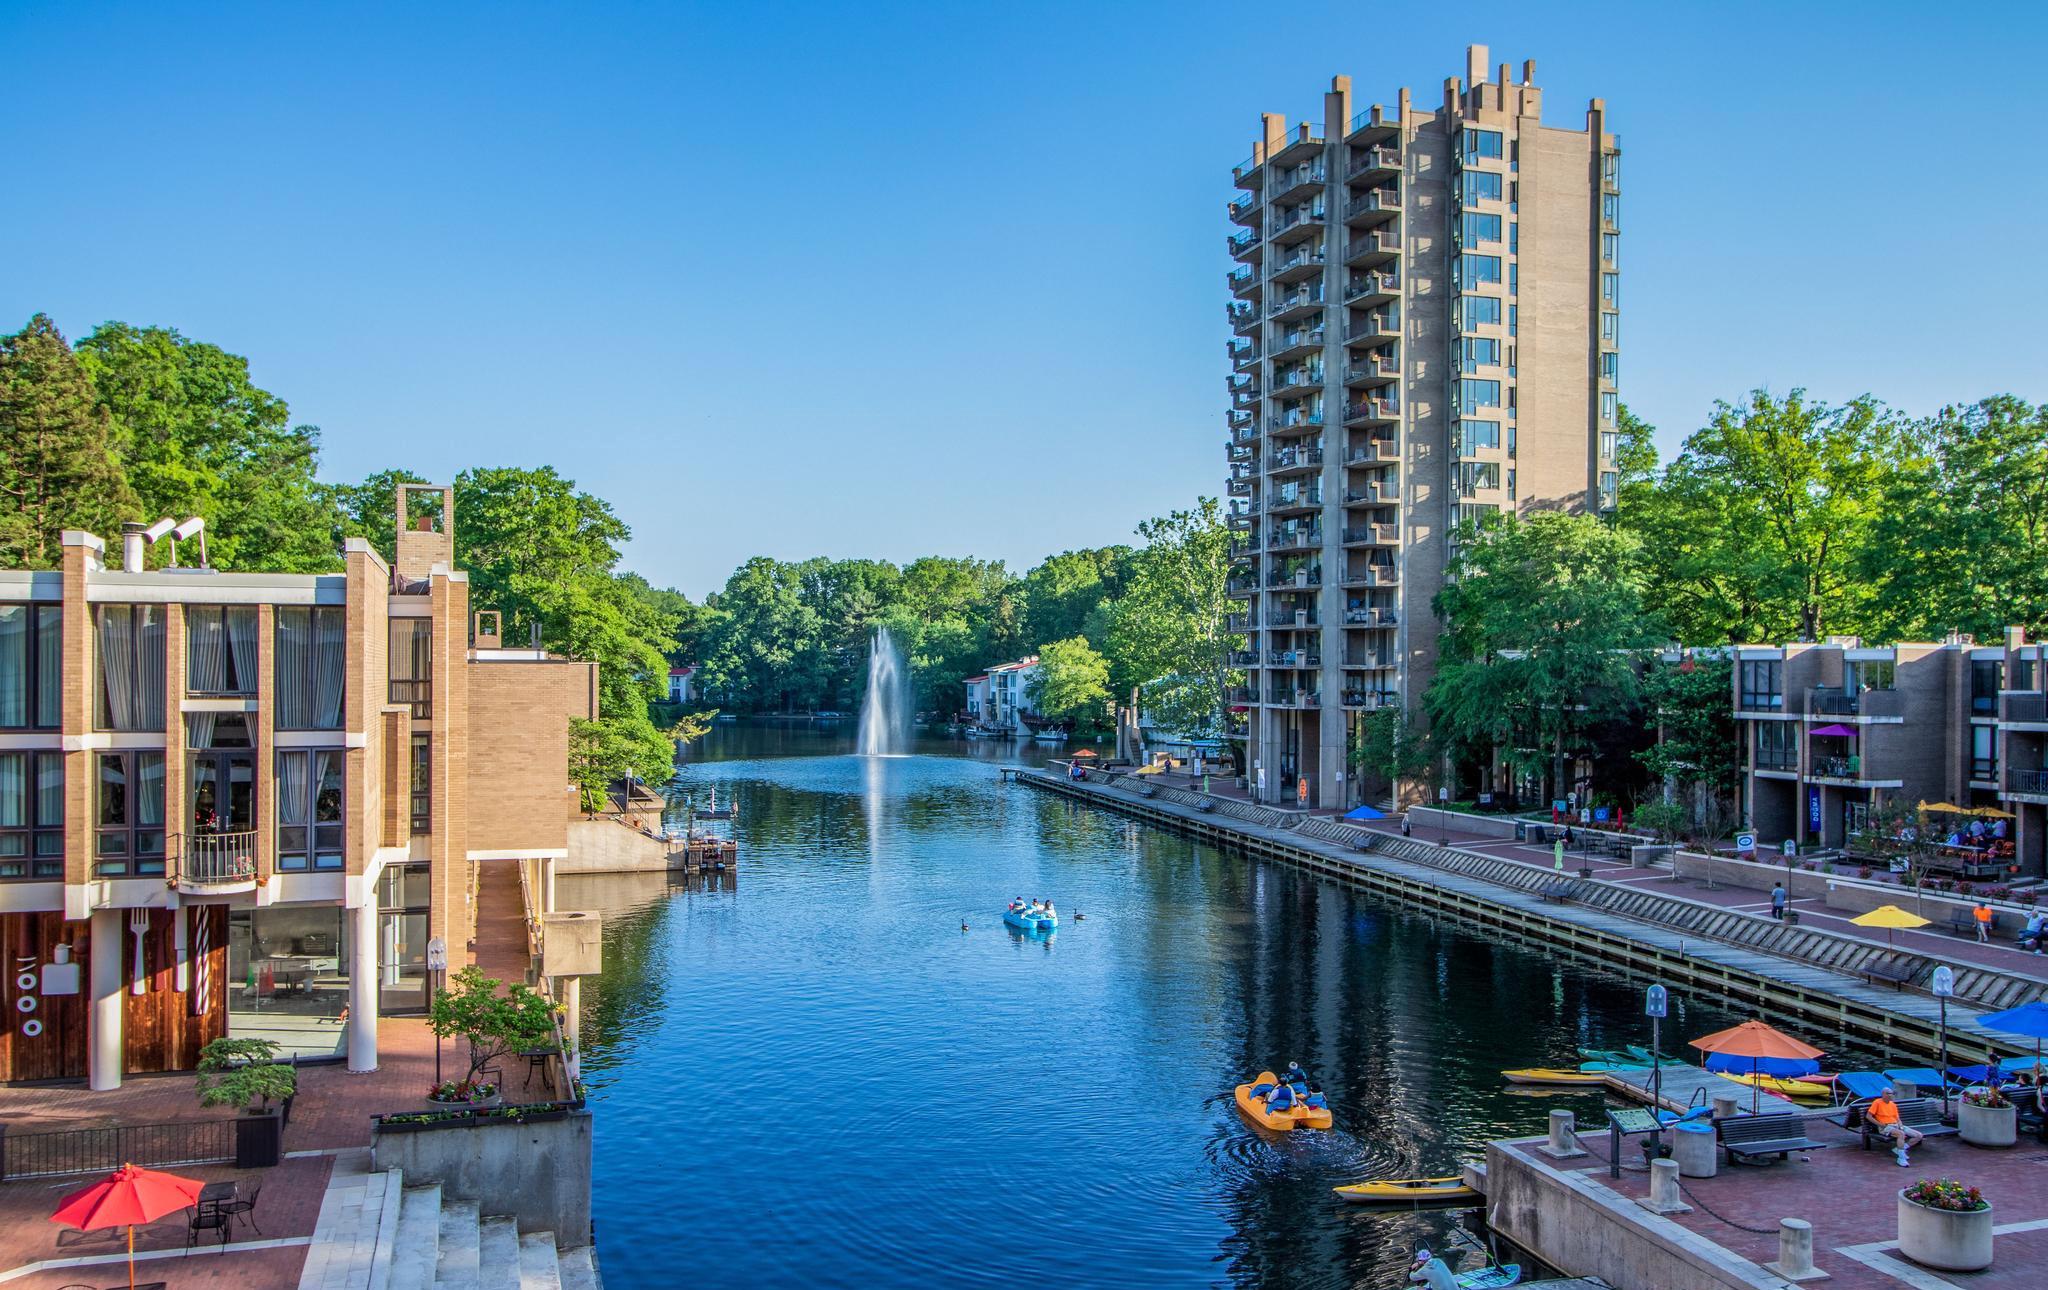 Lake Anne and Washington Plaza in Reston, VA during the Summer Time.